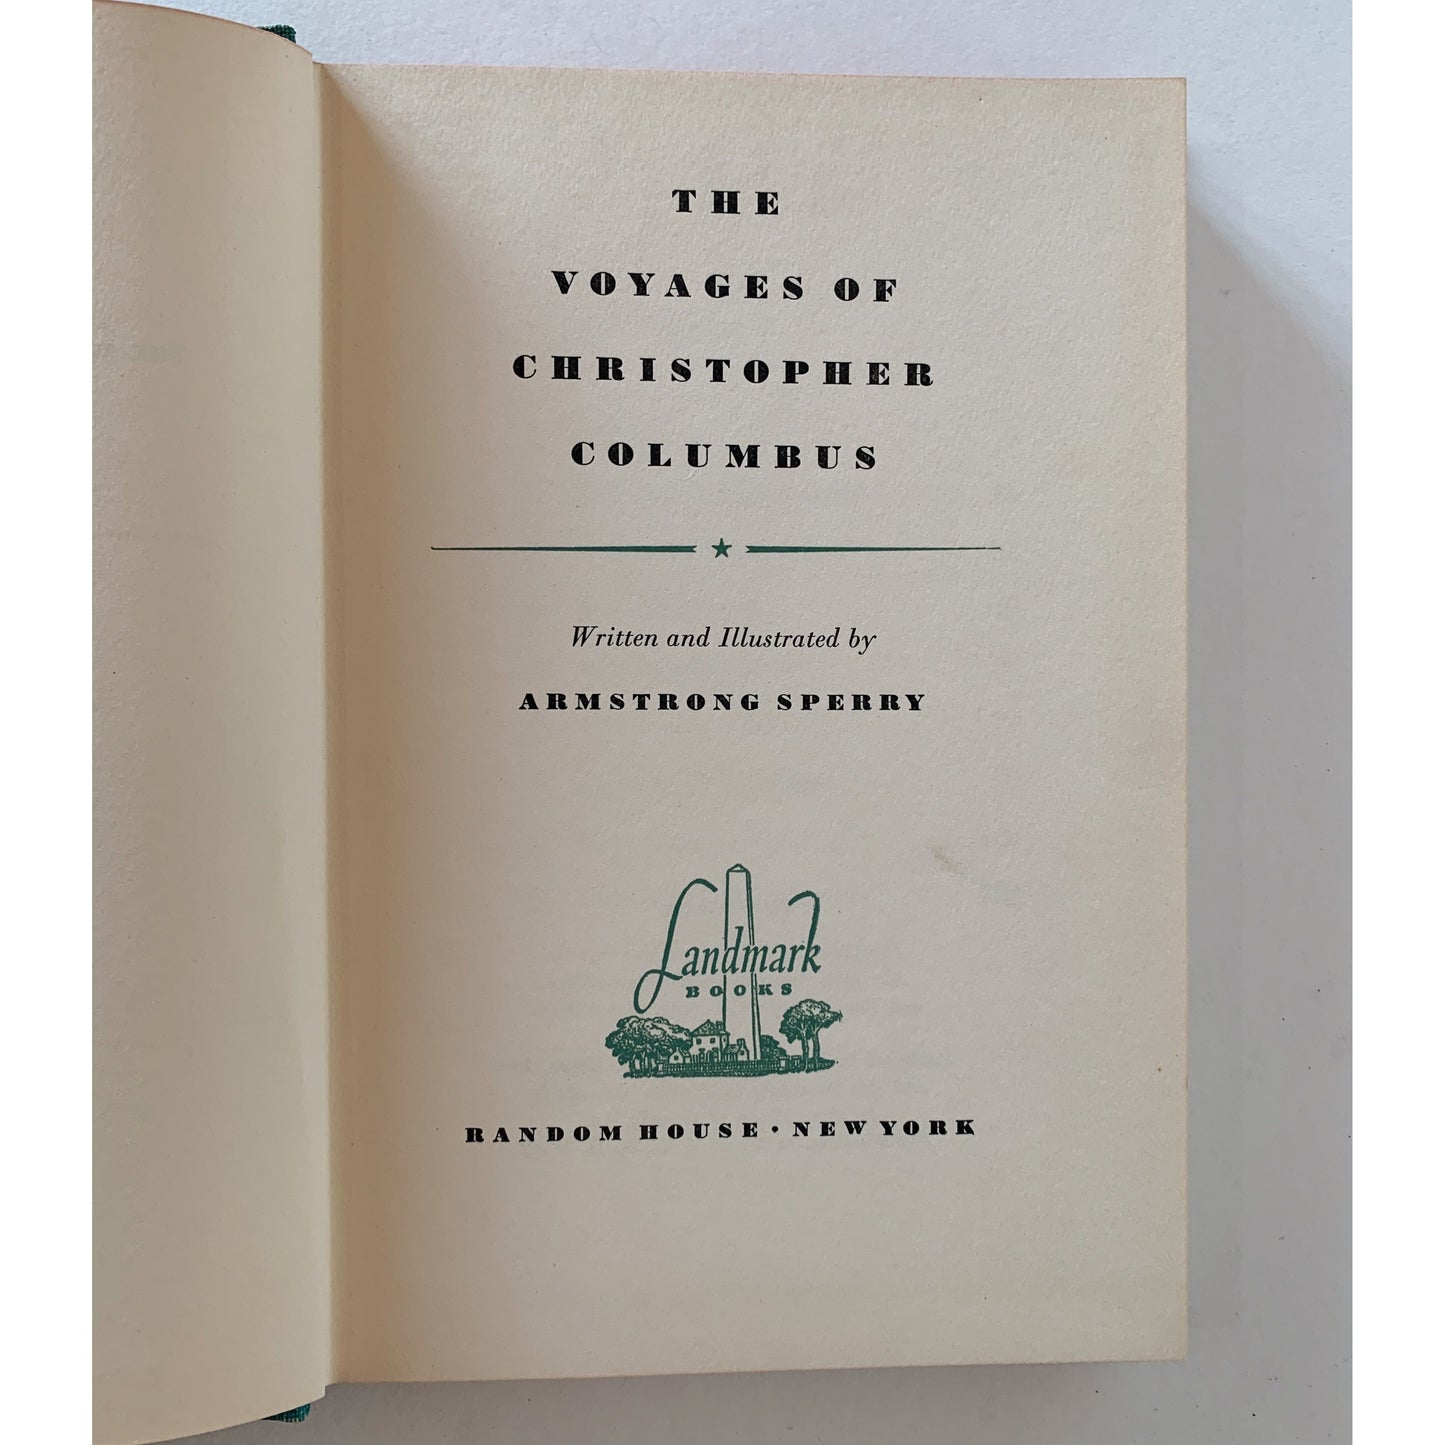 The Voyages of Christopher Columbus, Hardcover Landmark Book, 1950, Armstrong Sperry